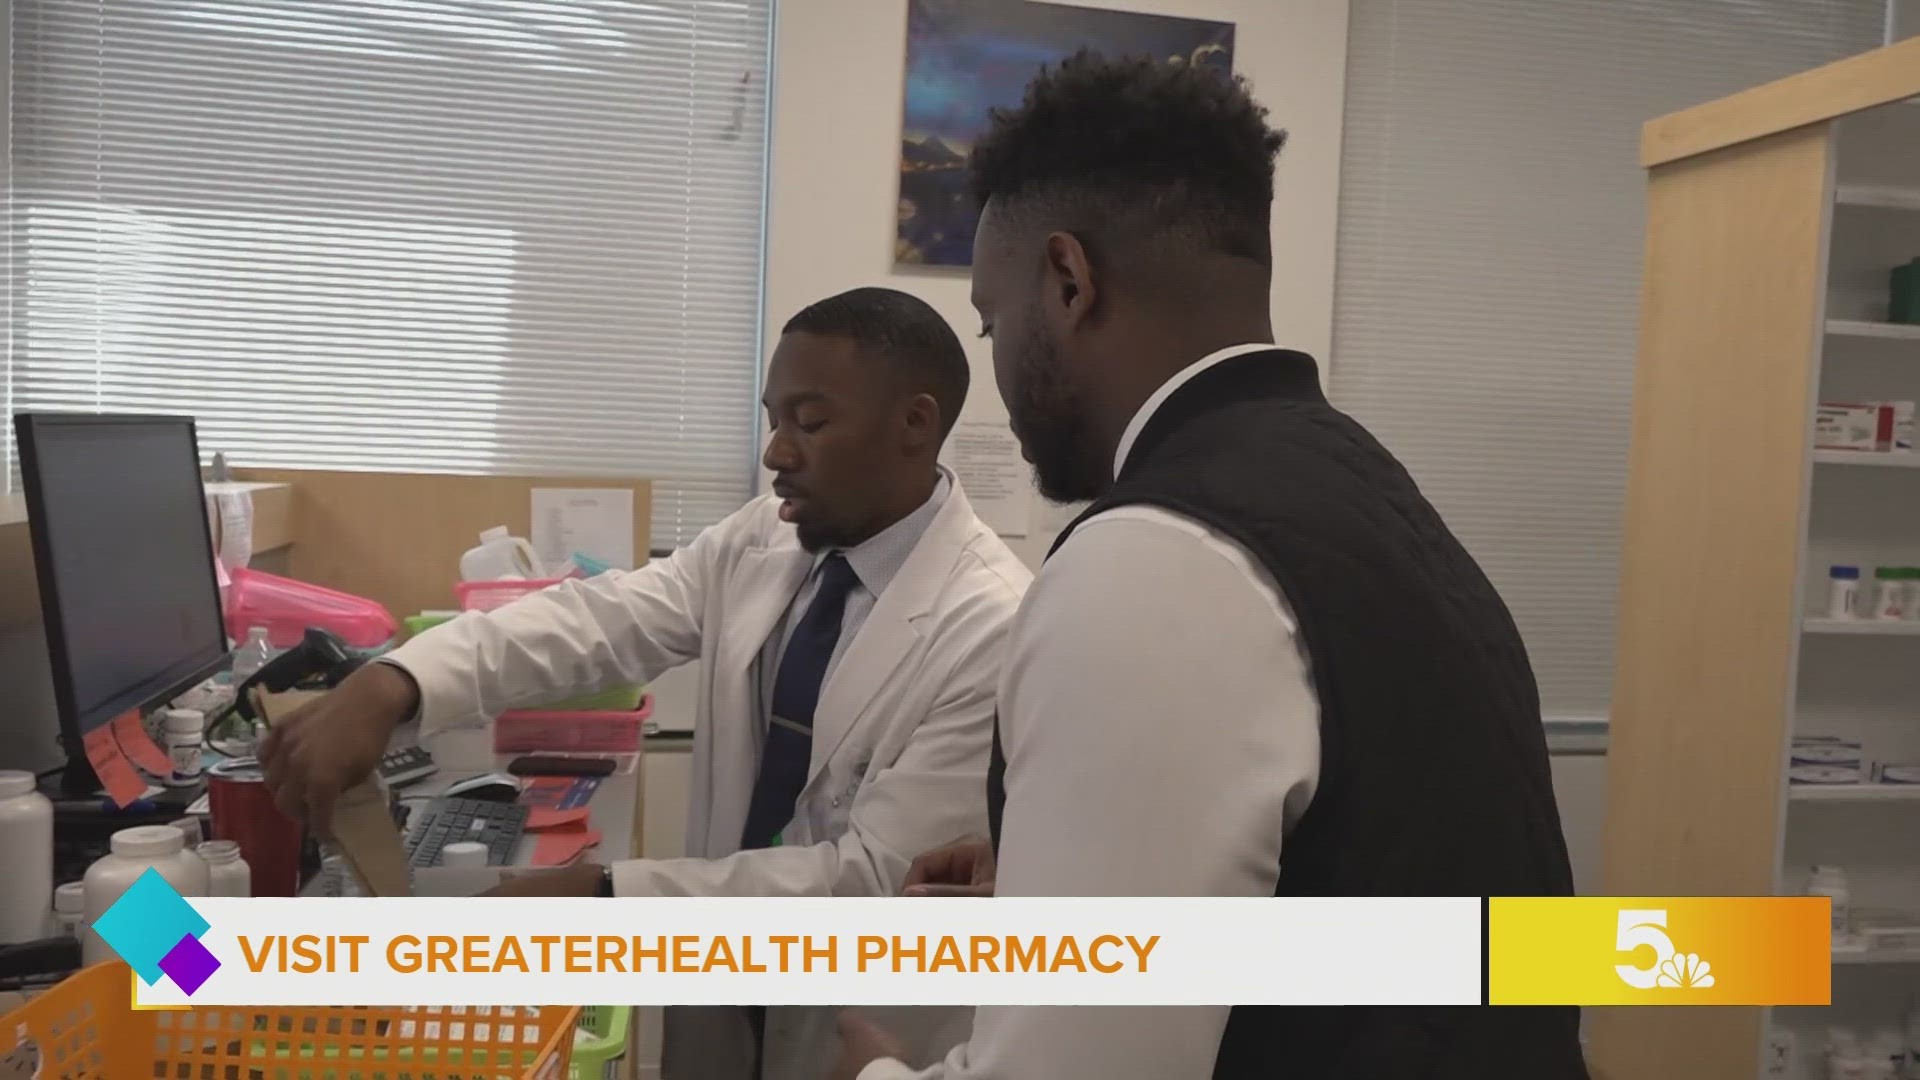 Last year, GreaterHealth Pharmacy and Wellness opened it's doors as the only black owned pharmacy in St. Louis.